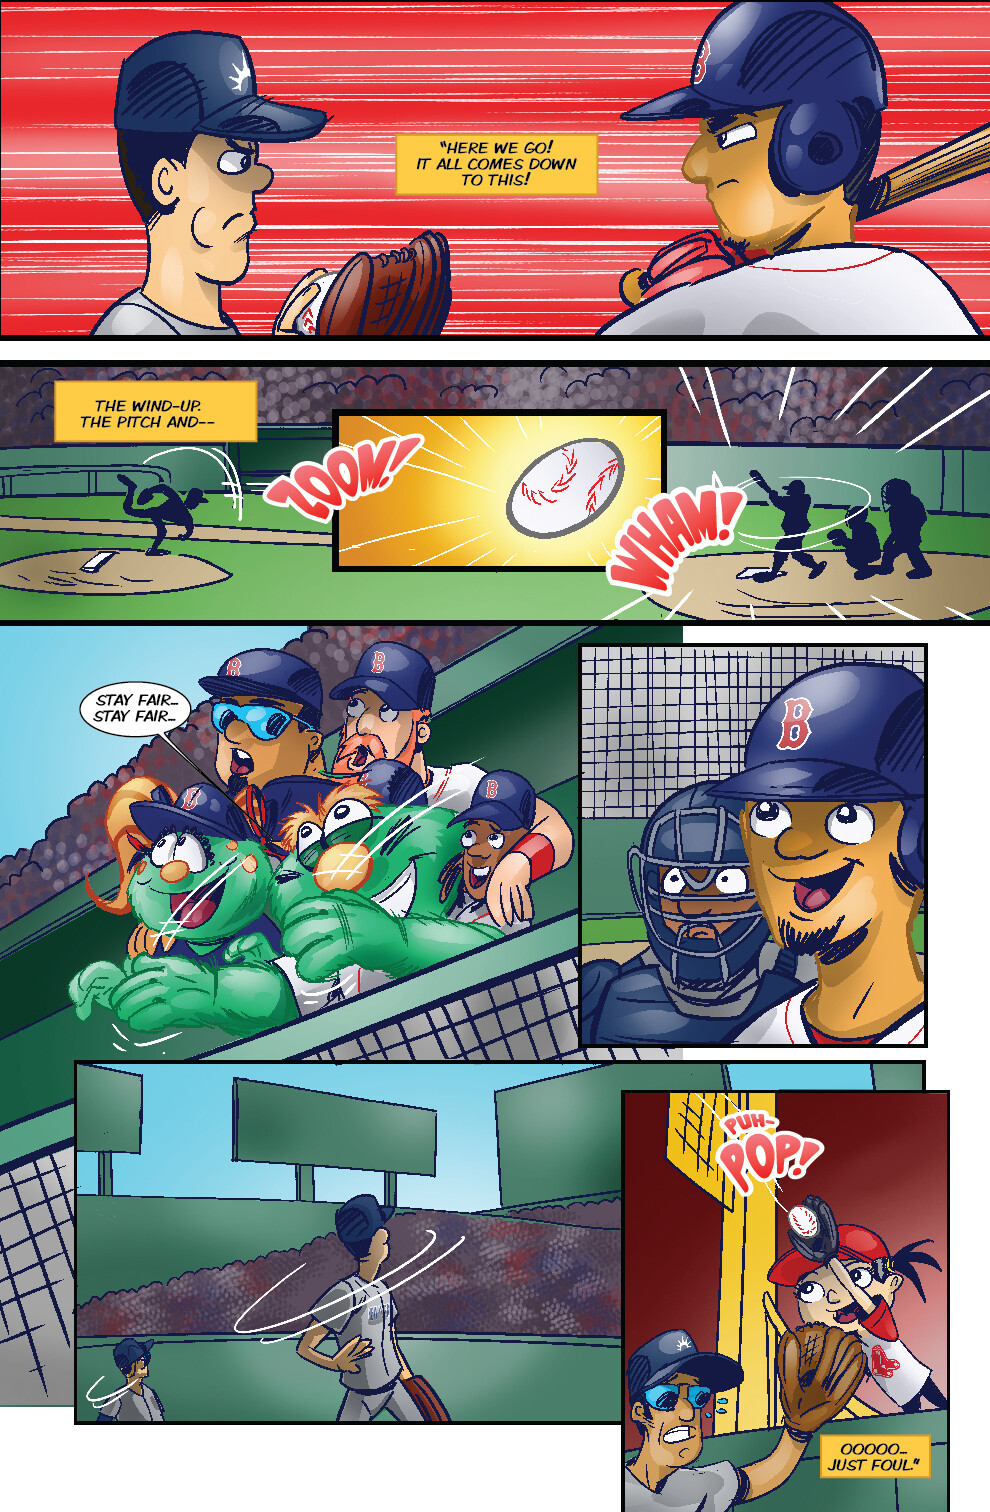 Sample Page 2 - Wally's Opening Day